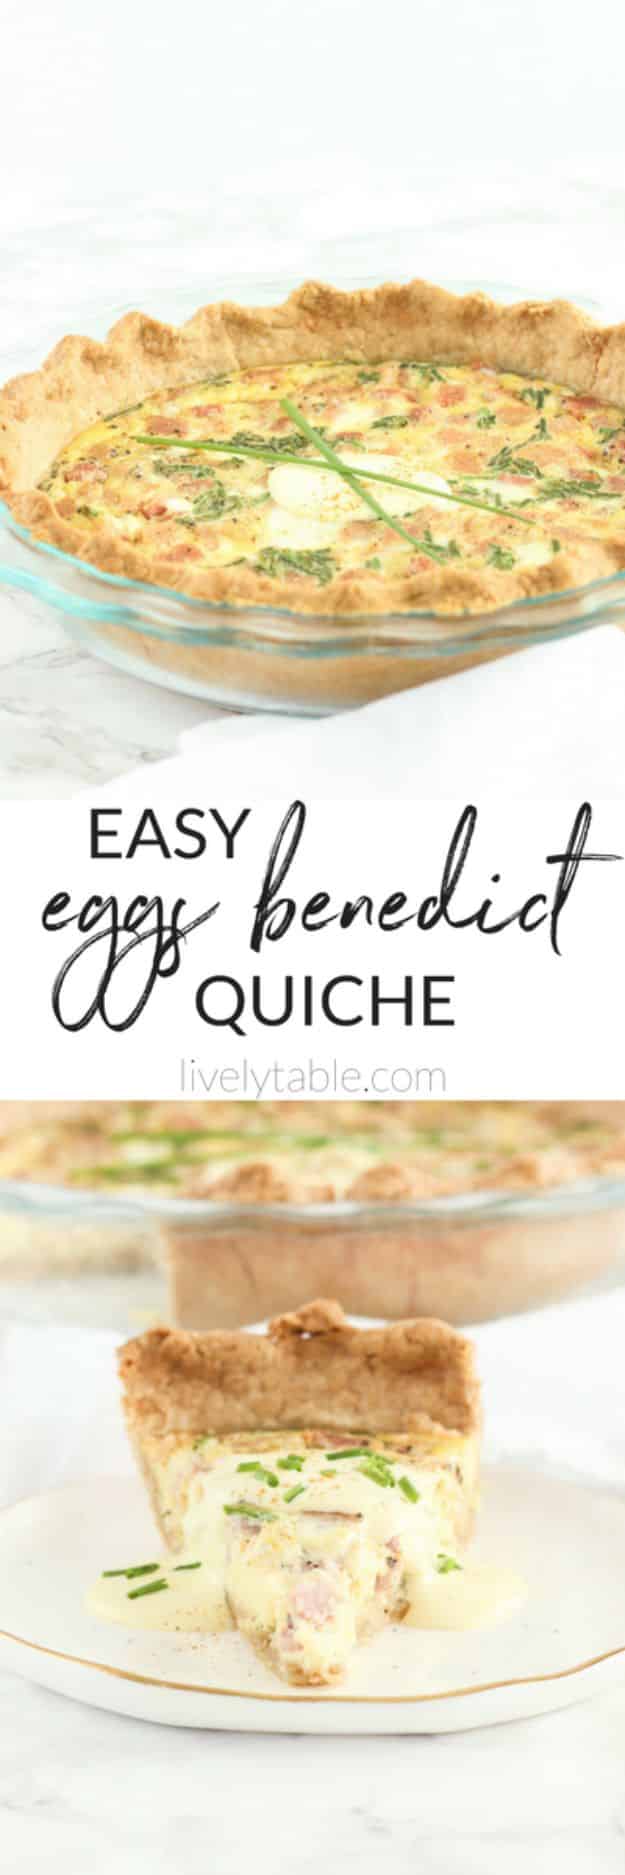 Best Brunch Recipes - Easy Eggs Benedict Quiche - Eggs, Pancakes, Waffles, Casseroles, Vegetable Dishes and Side, Potato Recipe Ideas for Brunches - Serve A Crowd and Family with the versions of Eggs Benedict, Mimosas, Muffins and Pastries, Desserts - Make Ahead , Slow Cooler and Healthy Casserole Recipes #brunch #breakfast #recipes